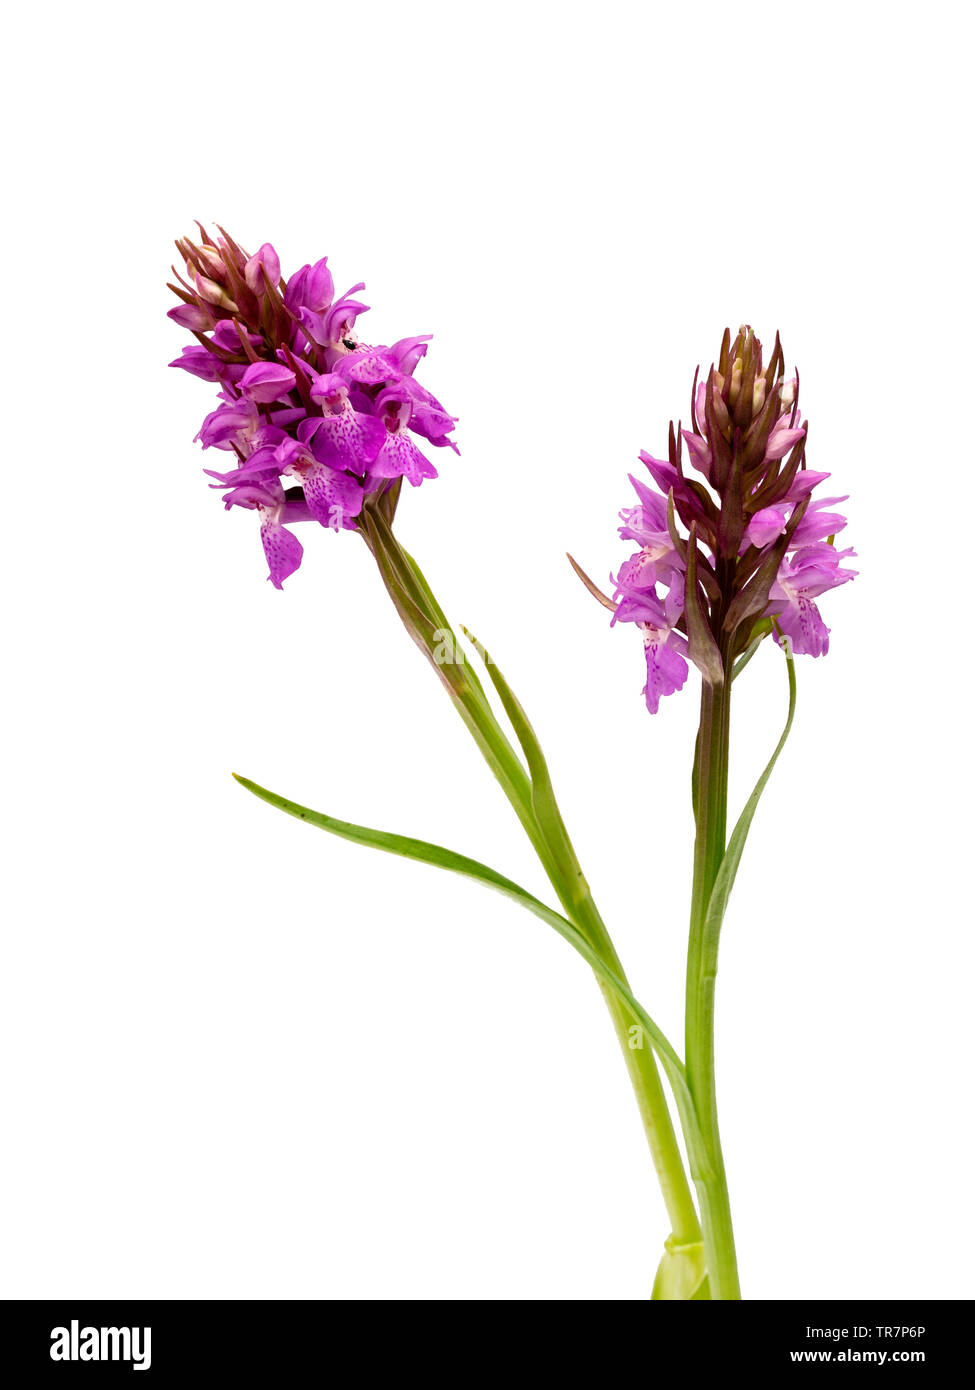 Early summer flower spikes of the UK native wildflower, Dactylorhiza praetermissa, the Southern Marsh Orchid on a white background Stock Photo